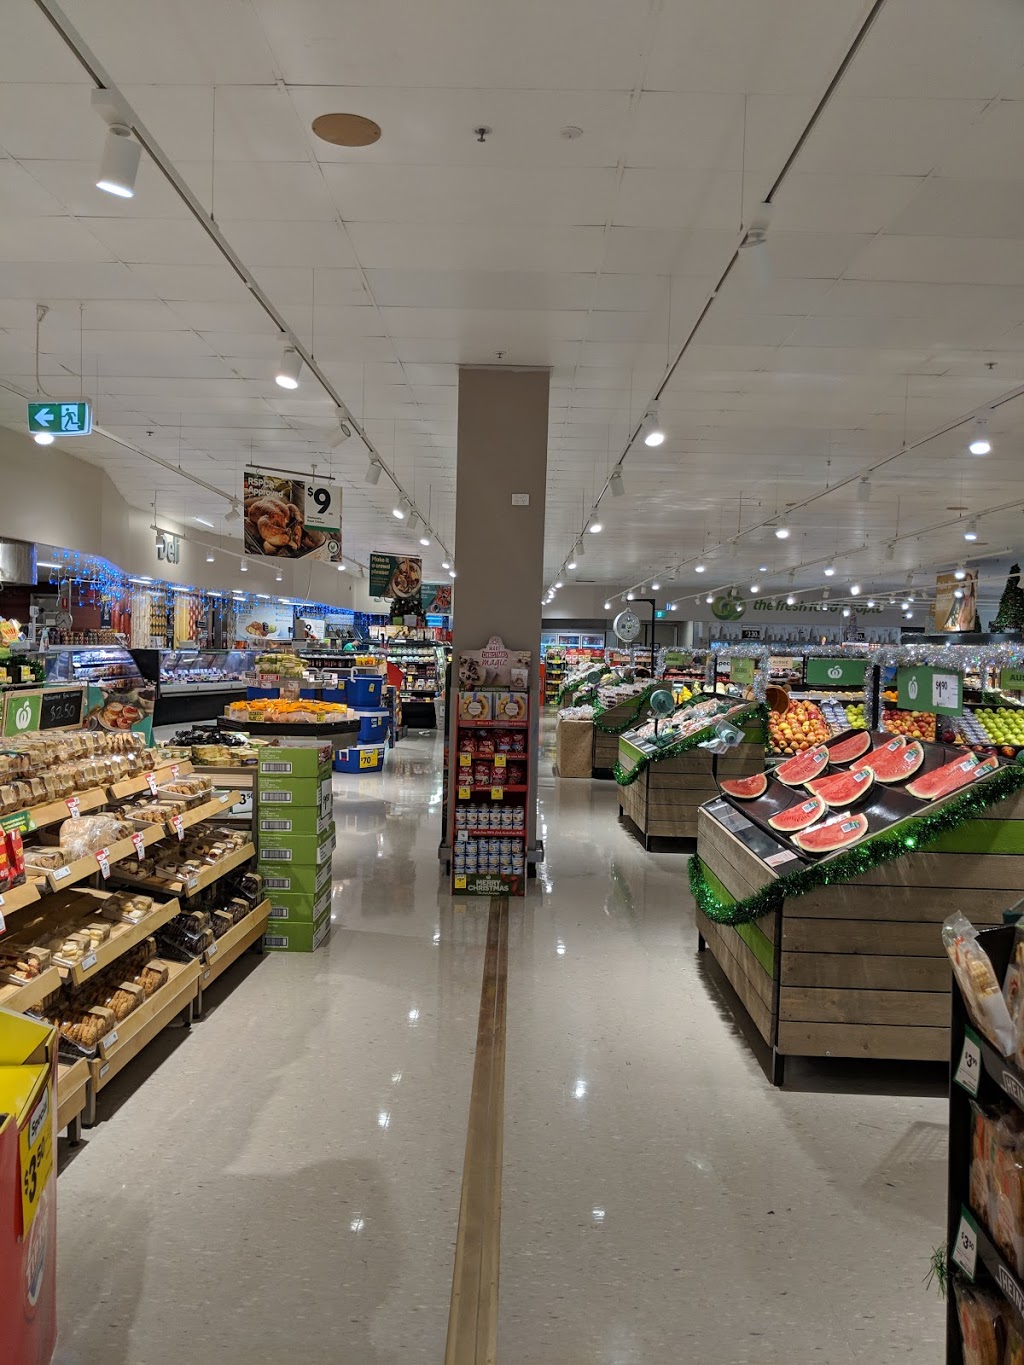 Woolworths Caboolture South | 62 Morayfield Rd &, Market Dr, Morayfield QLD 4510, Australia | Phone: (07) 5420 3002